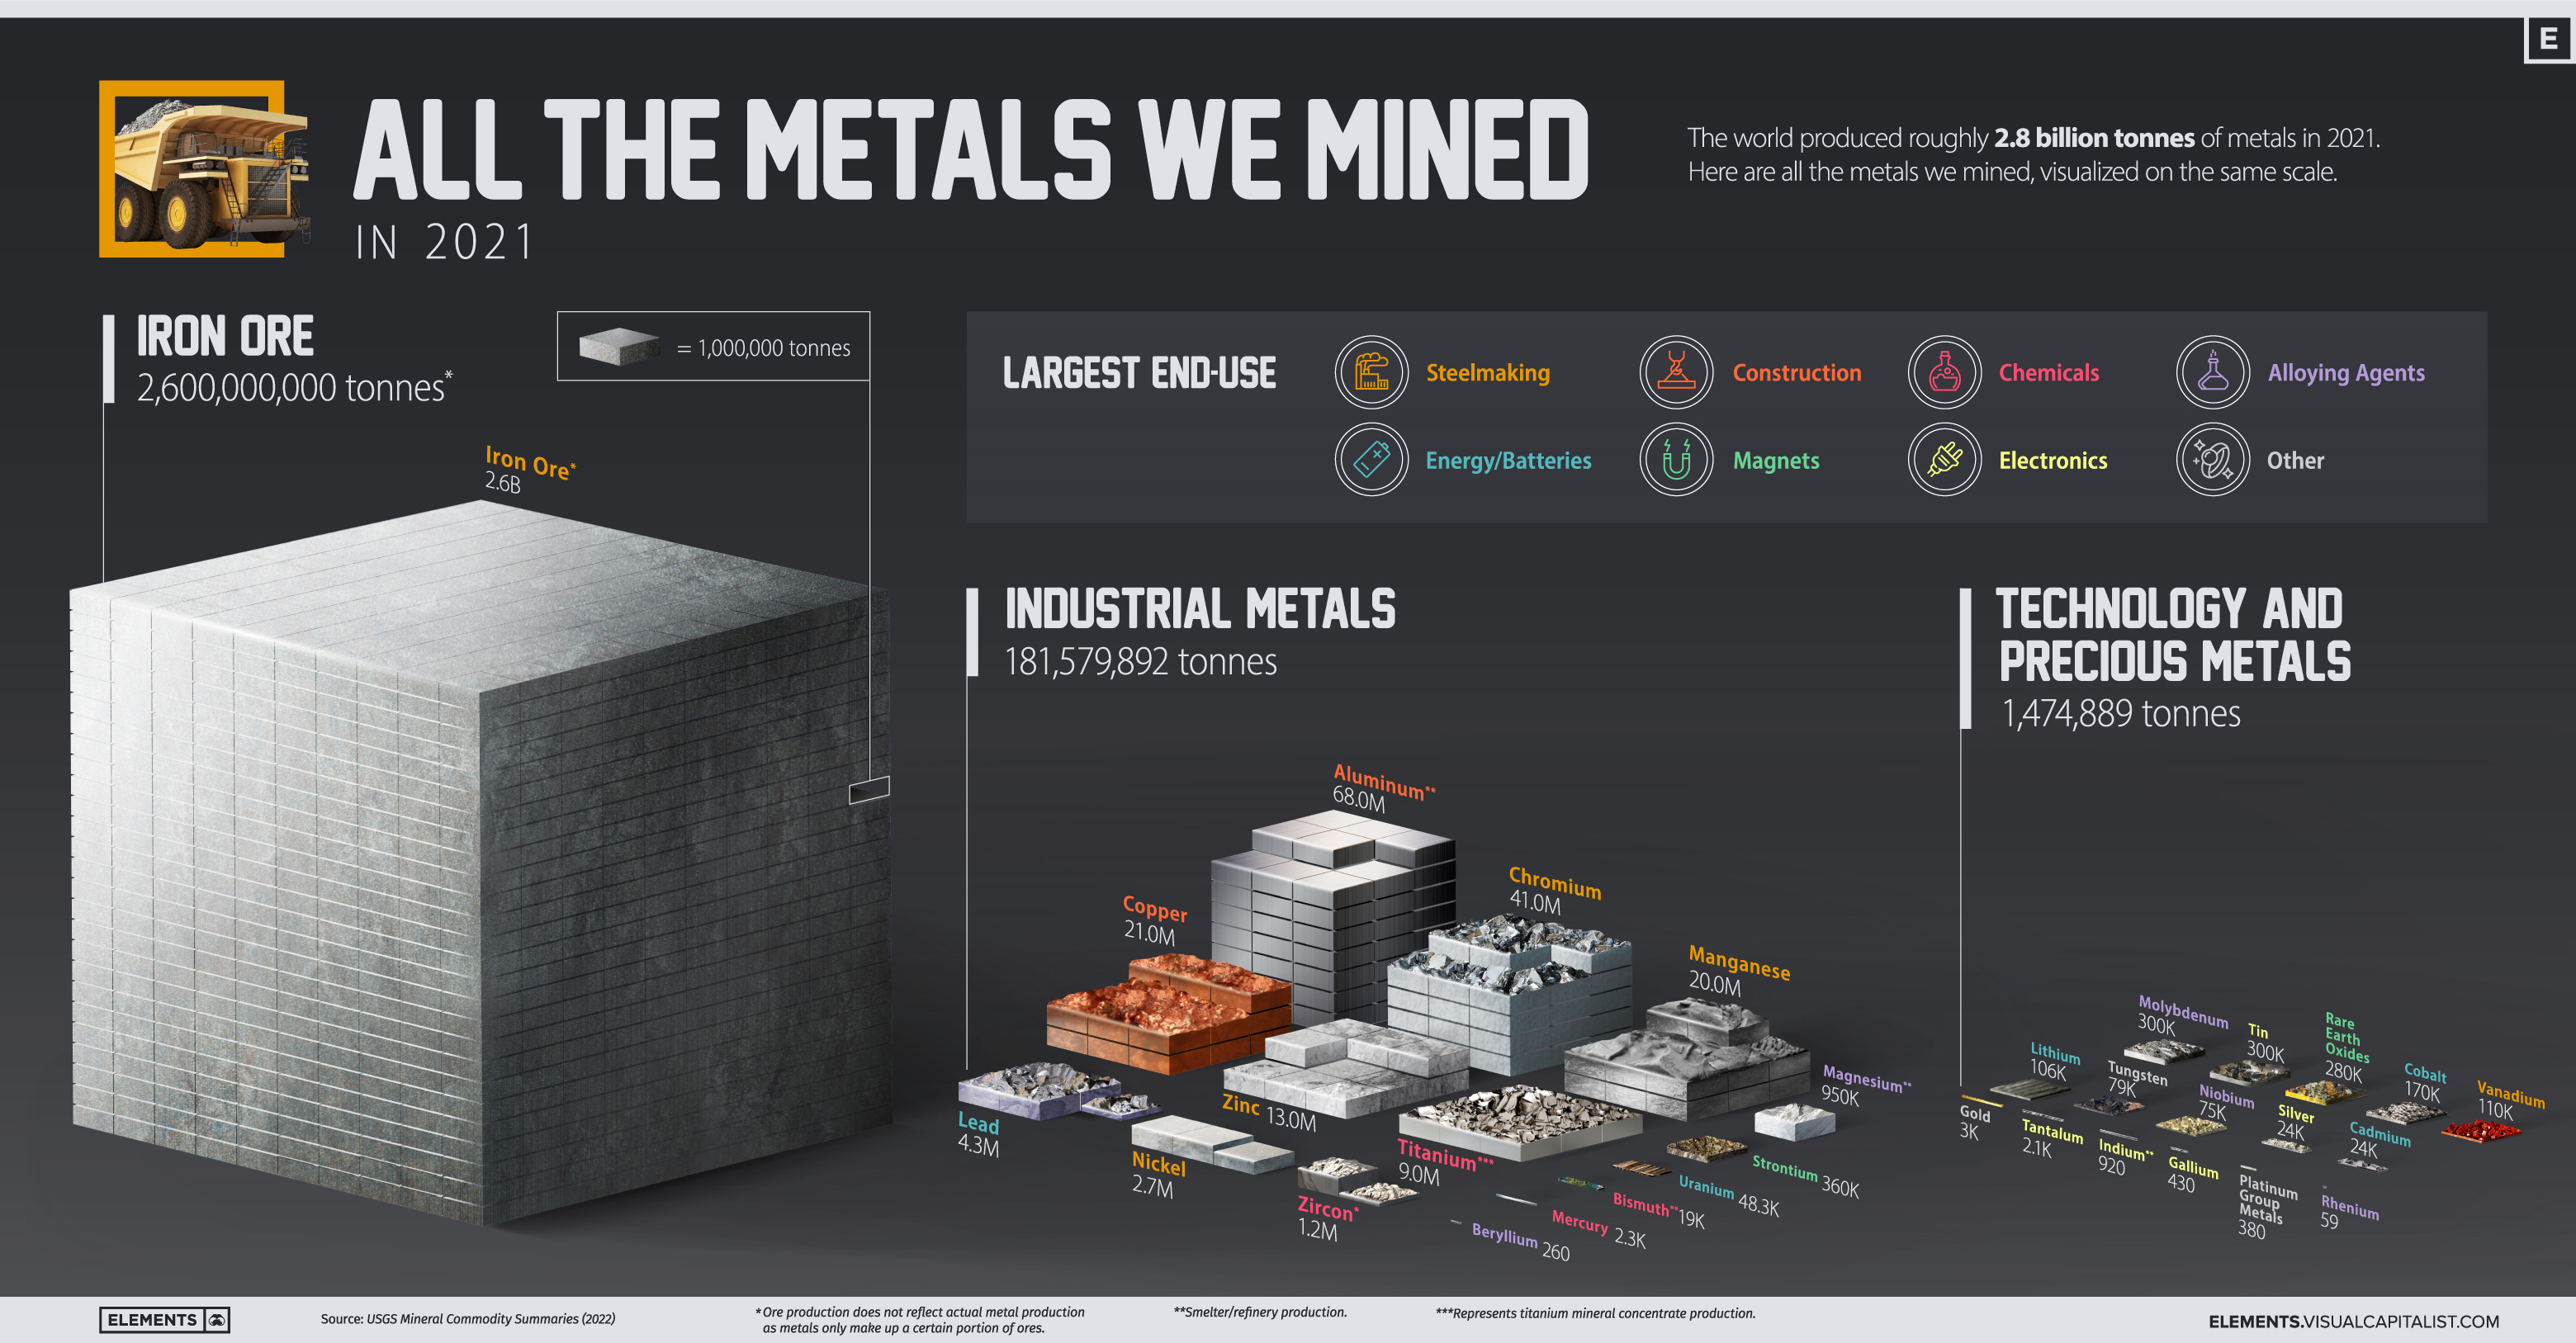 infographic showing all the metals mined in 2021